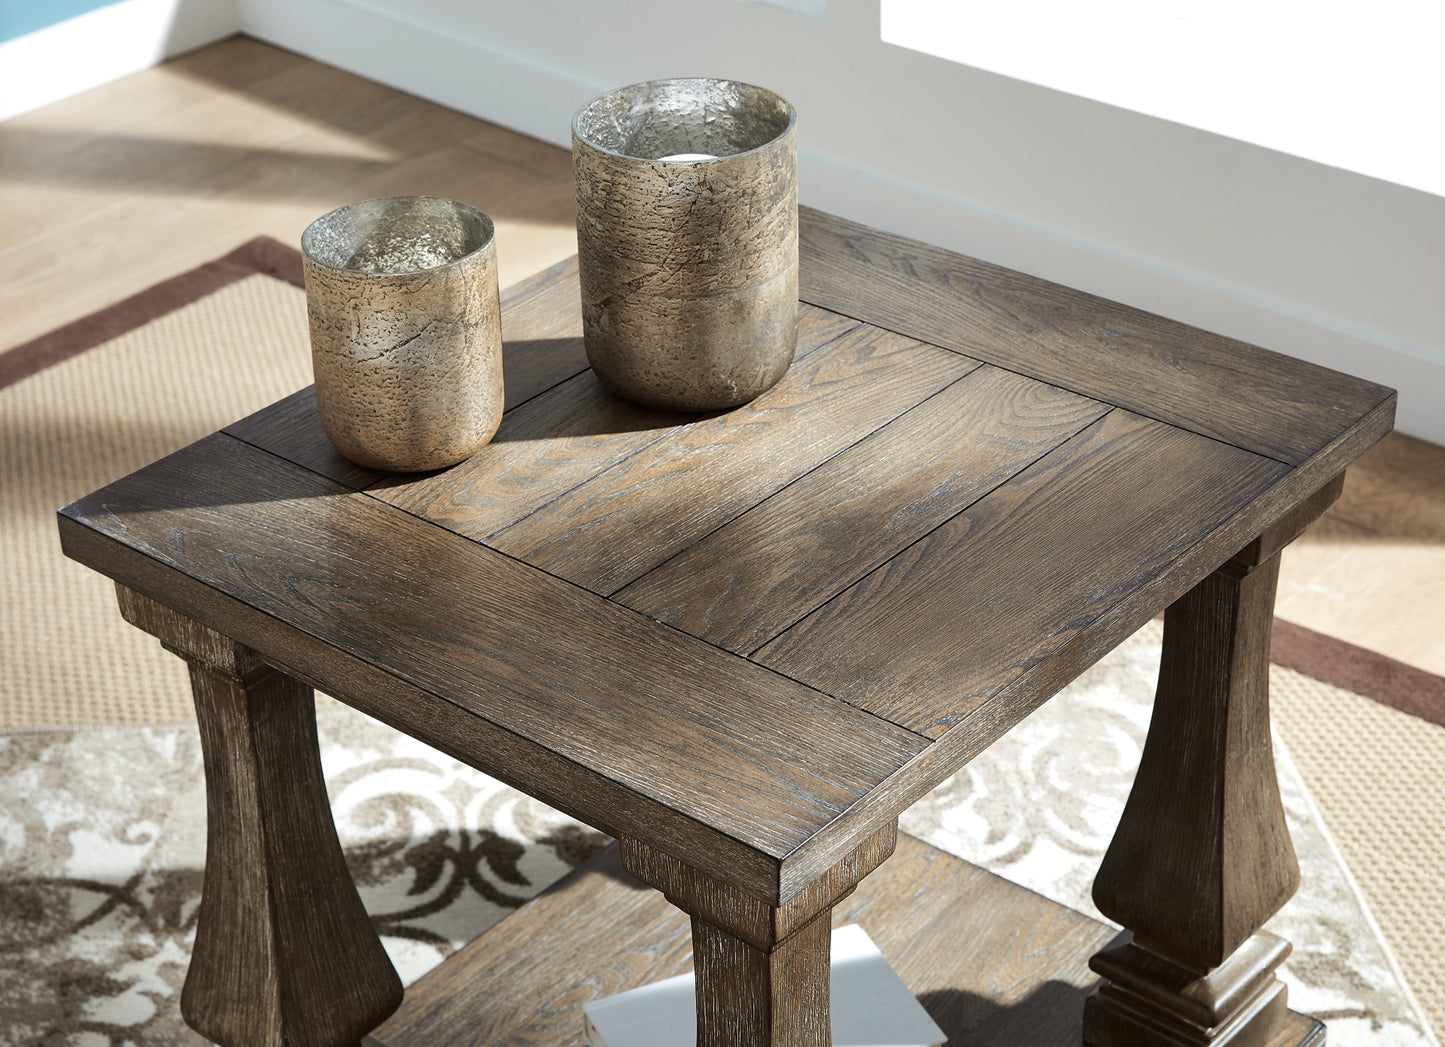 Johnelle Rectangular End Table Signature Design by Ashley®